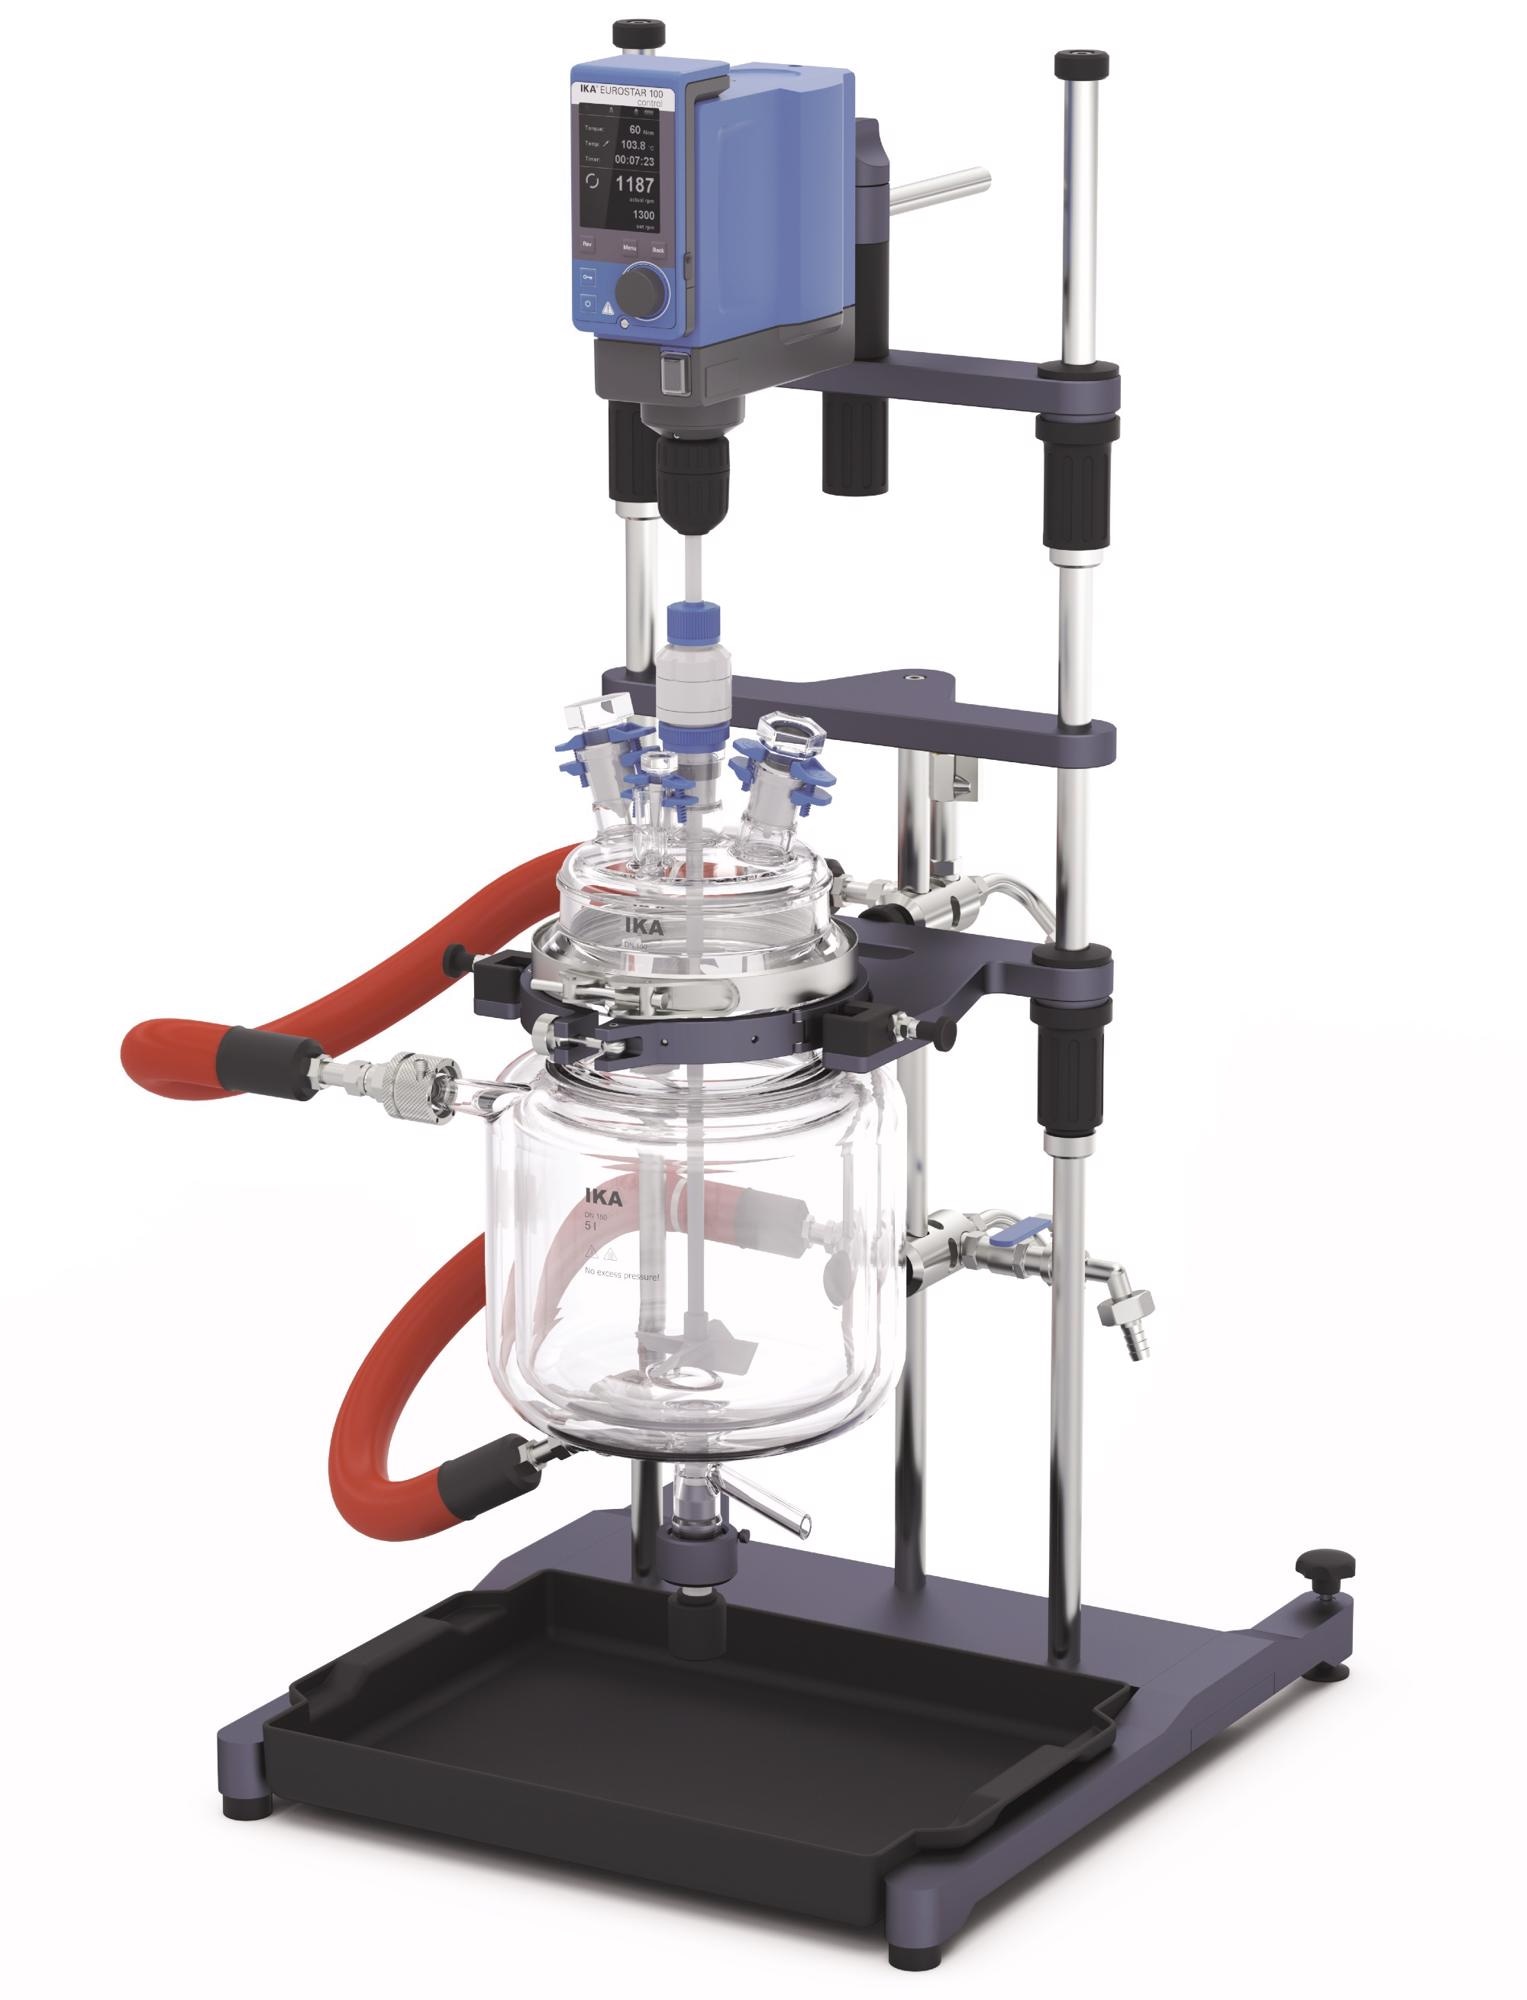 EasySyn Reactor System for Organic or Aqueous Synthesis